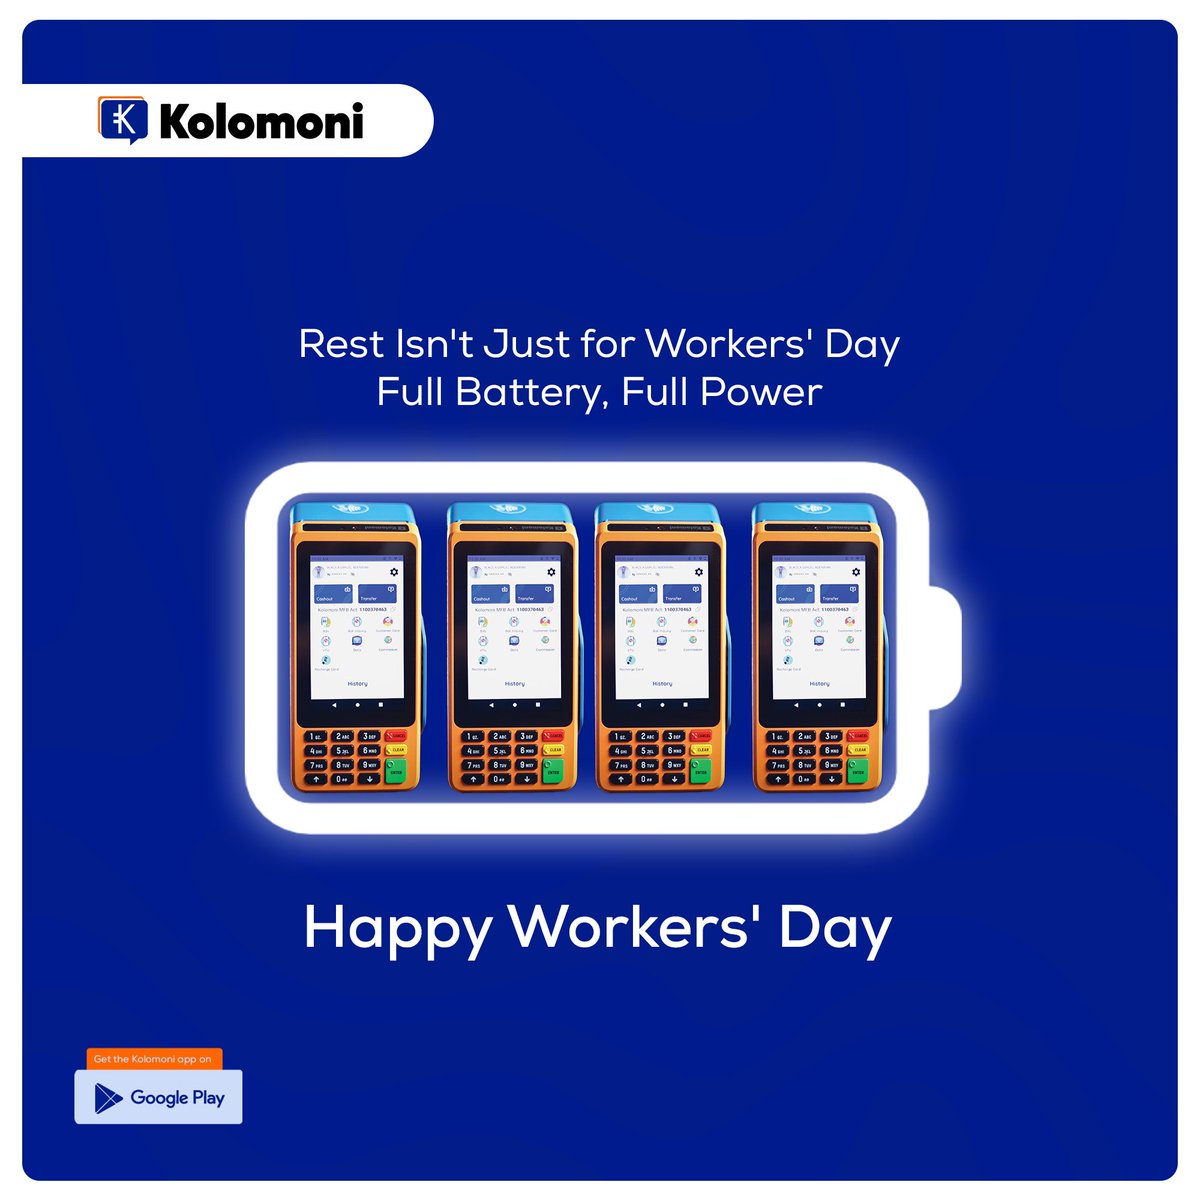 Cheers to all the incredible workers out there.

Today is a tribute to your dedication, but remember rest isn’t a reward, it’s the fuel for future success. 

Take time to recharge this Workers’ Day and every day. 

Happy Workers’ Day🎉

#WorkersDay #PrioritizeWellness